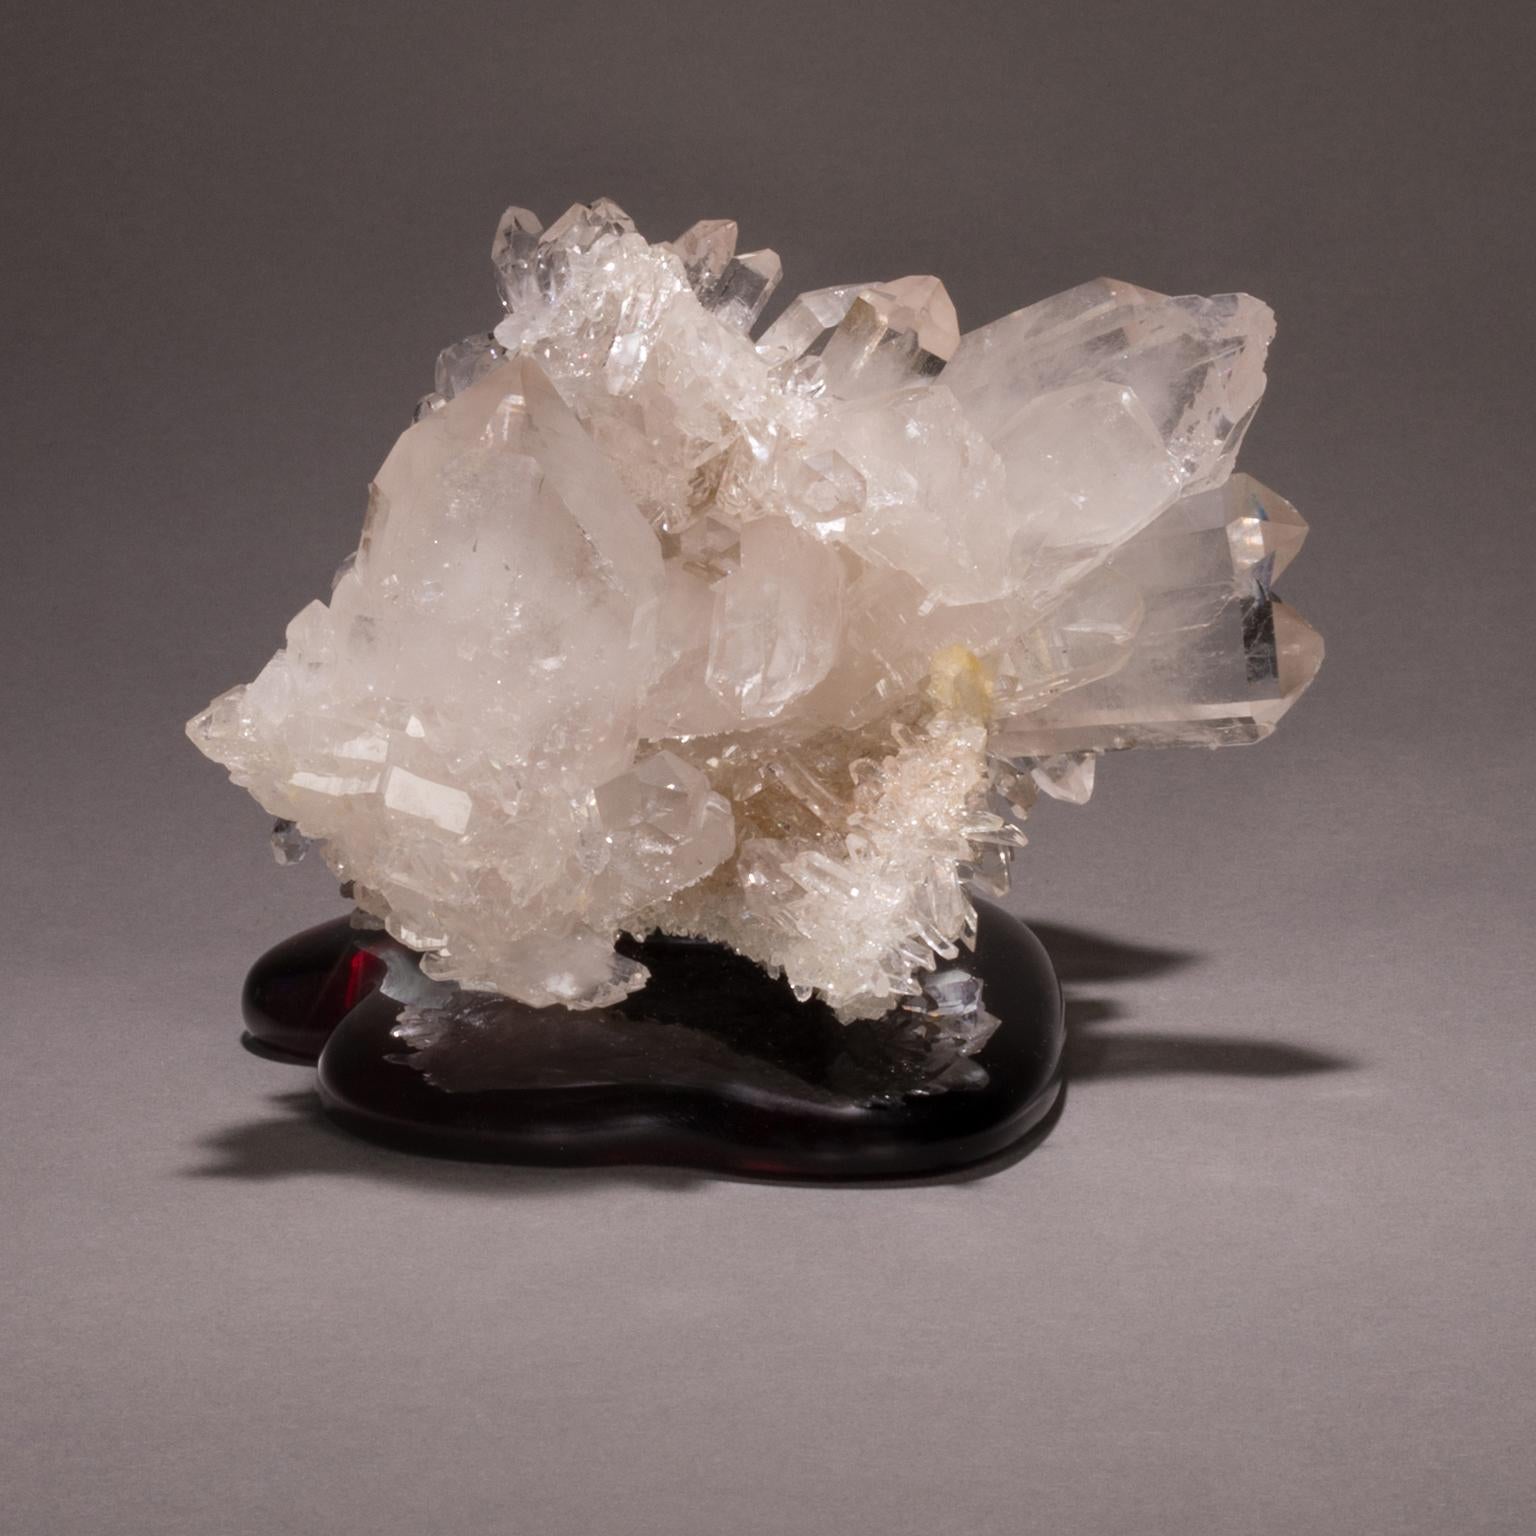 Studio Greytak 'Himalayan Quartz on Cast Glass' White Quartz on Red Art Glass In New Condition For Sale In Missoula, MT